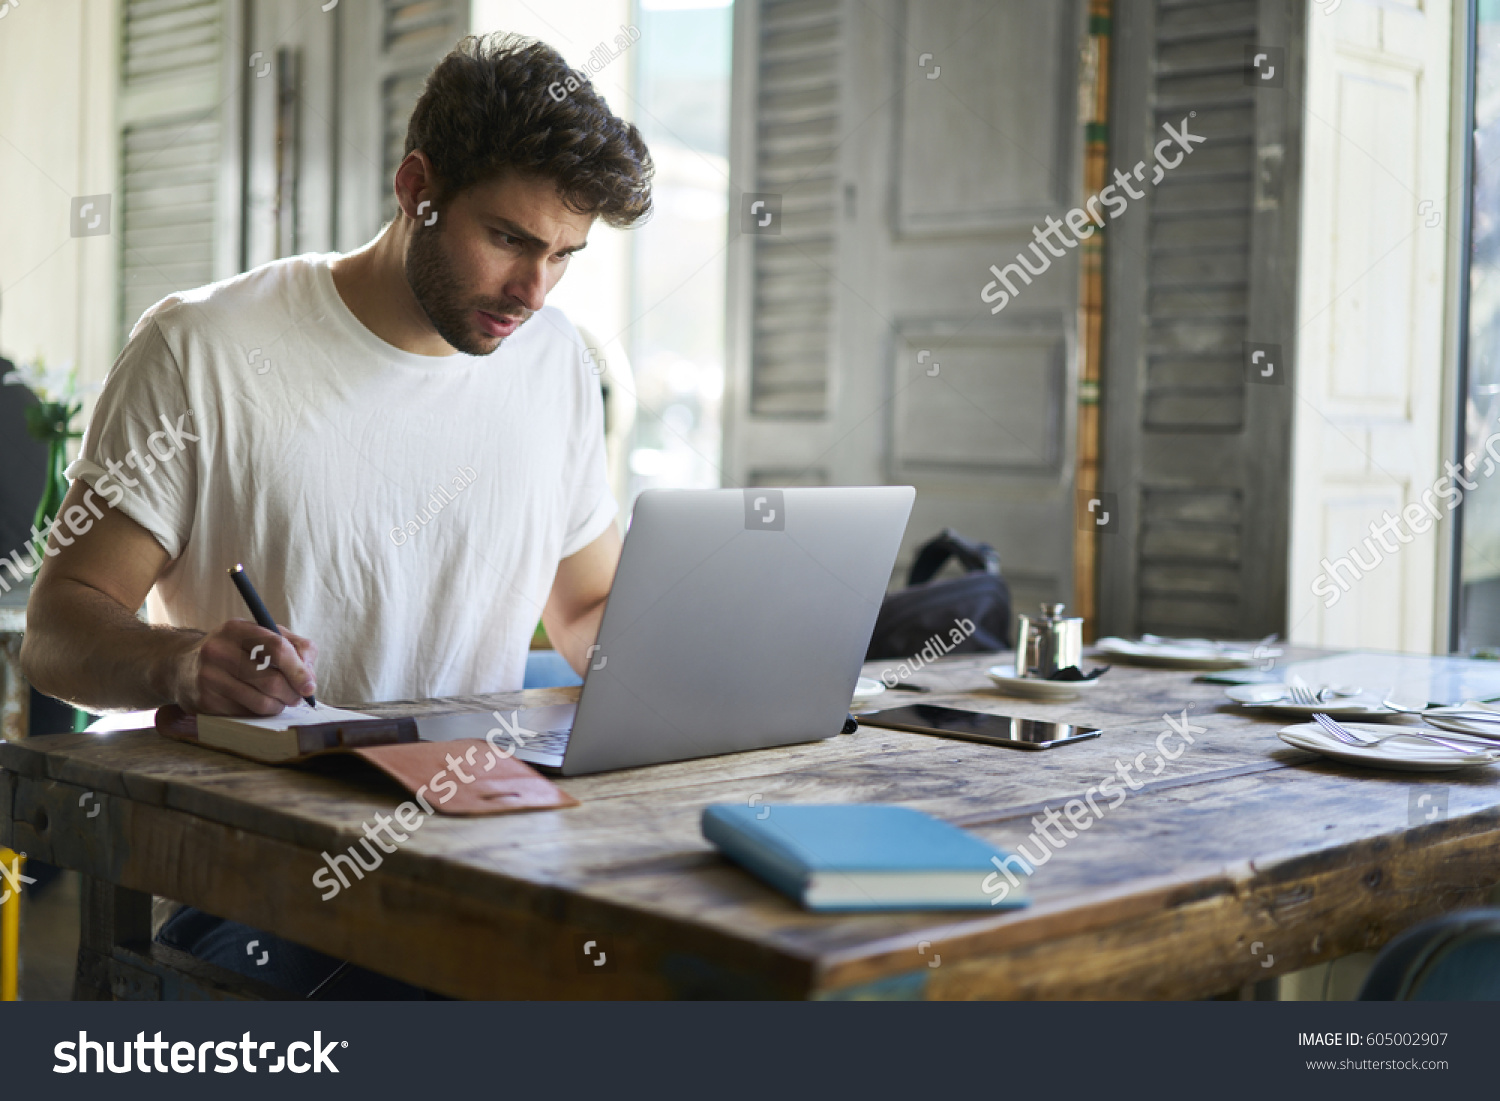 Beautiful bearded international student writing notes in notebook and searching new information creative ideas for future studying project using laptop with wireless connection and modern laptop #605002907